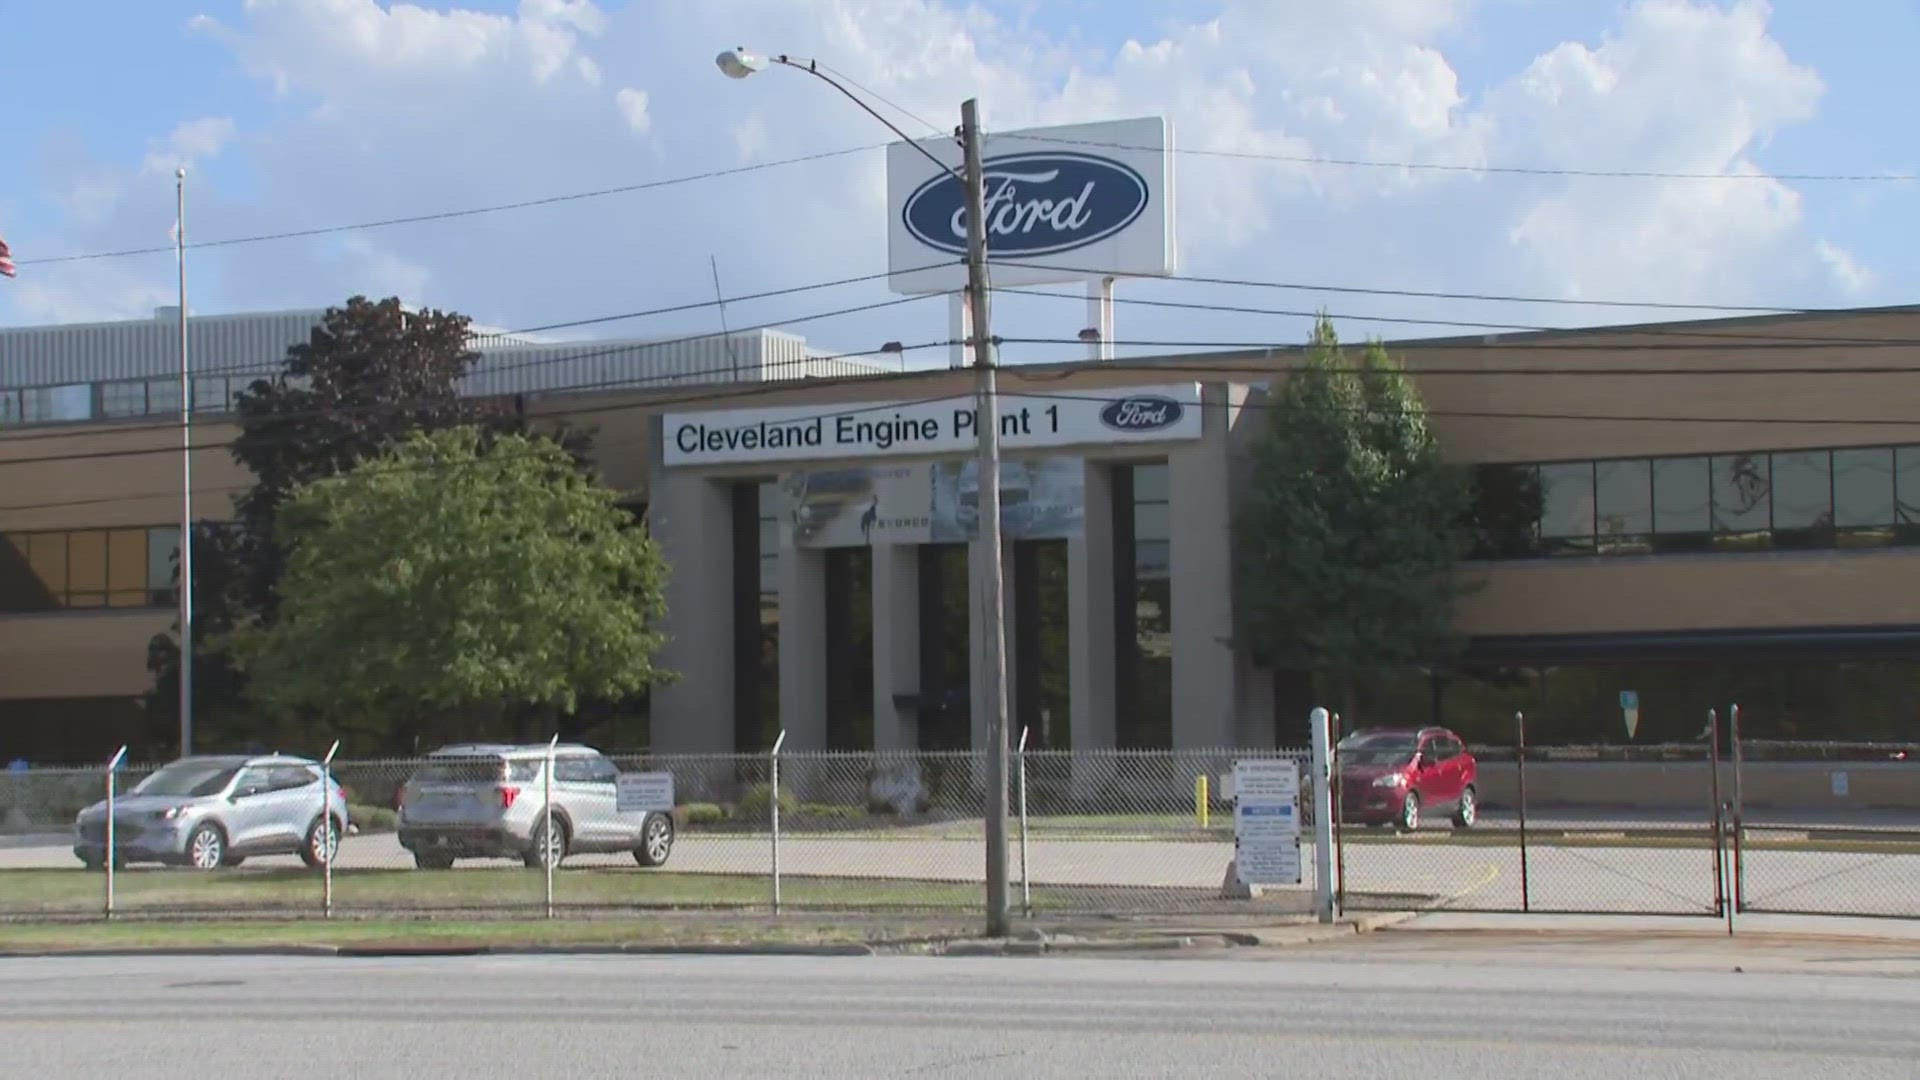 Union official: GM to add up to 400 jobs in Toledo